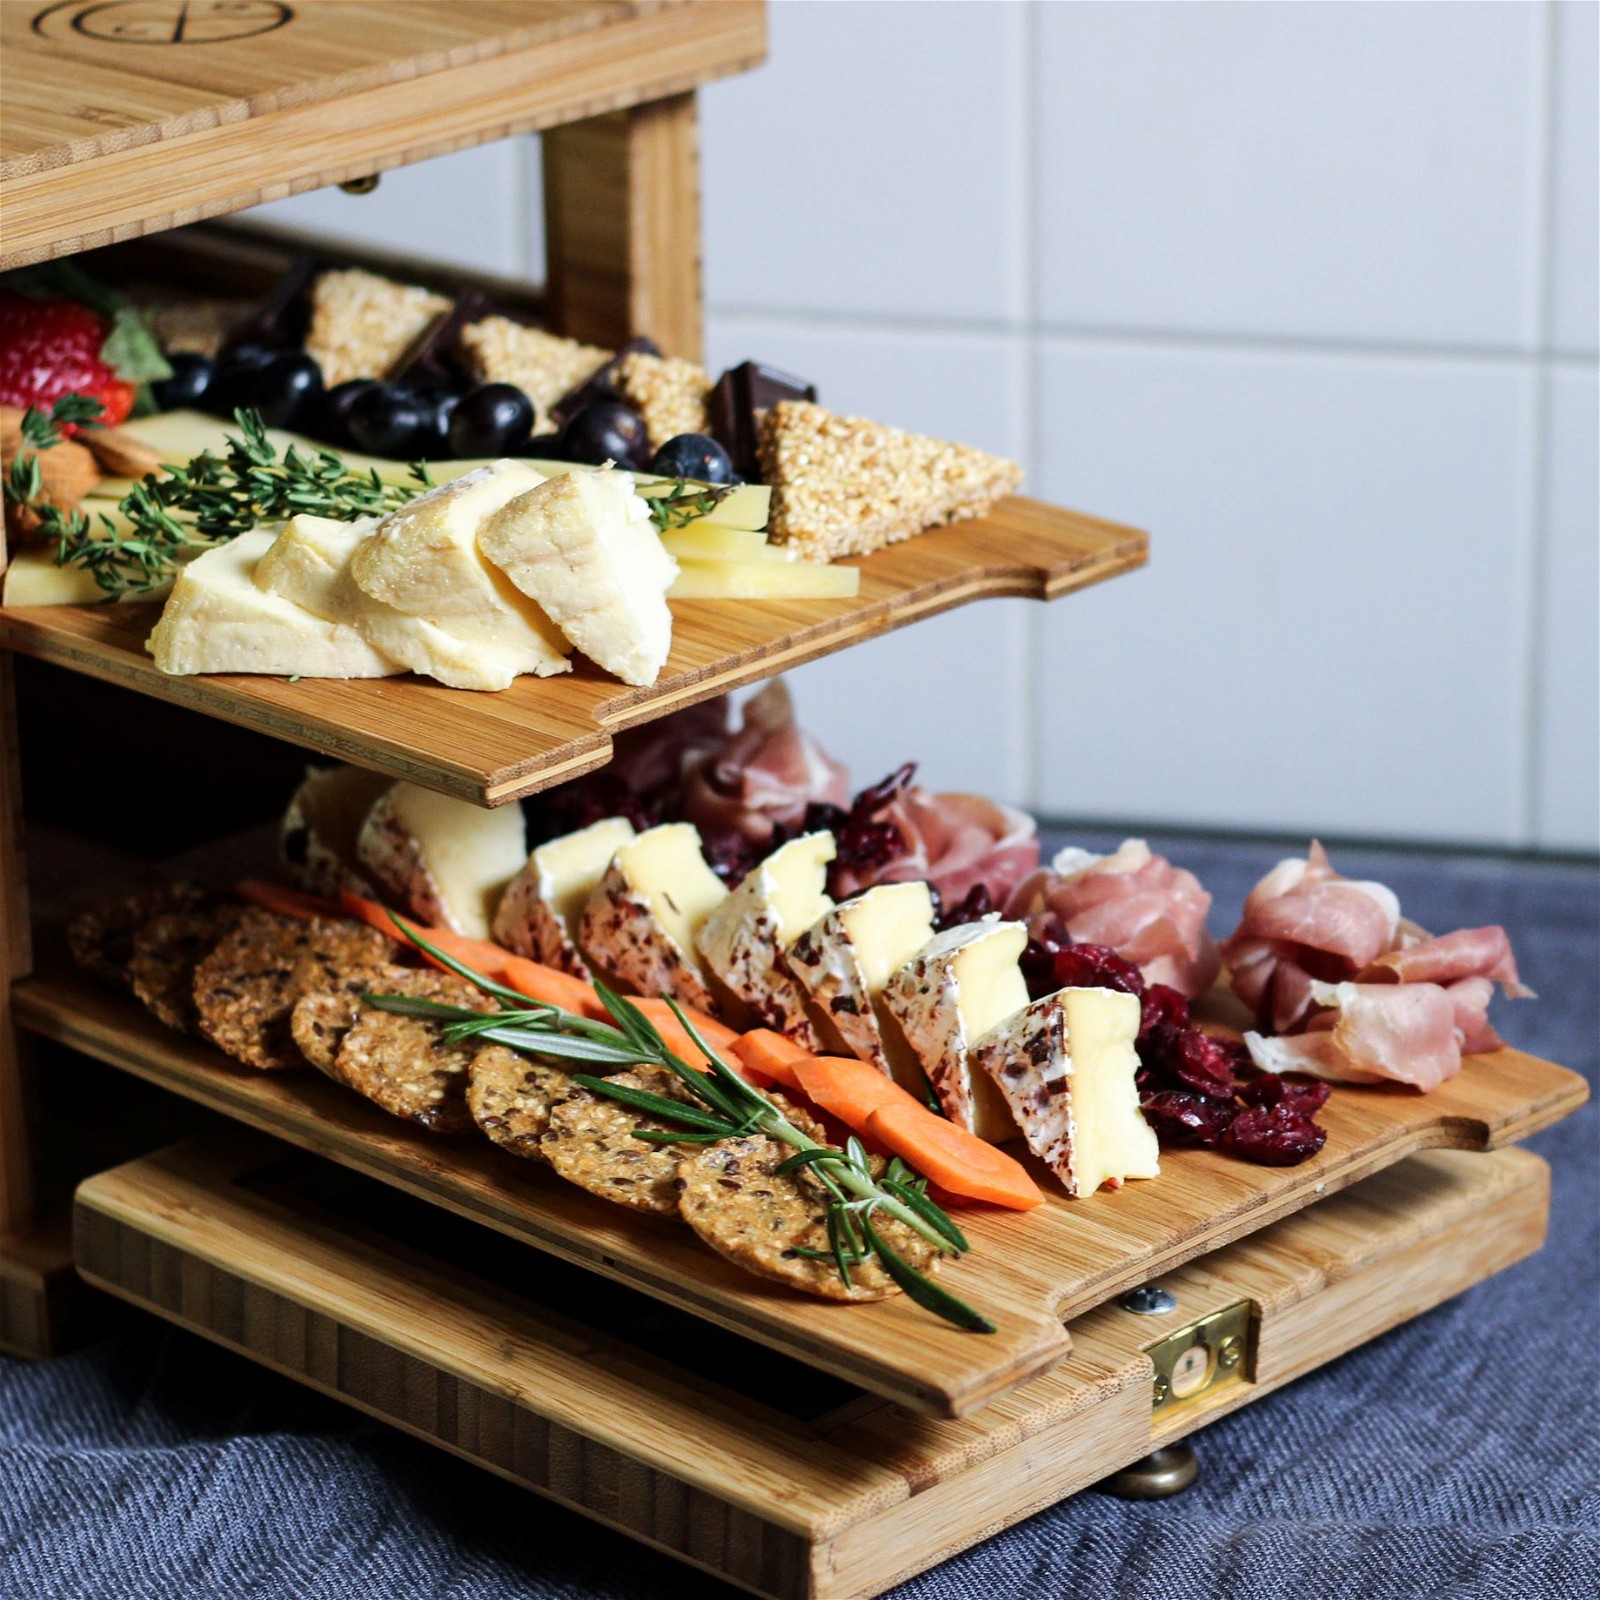 https://images.getrecipekit.com/20220426154909-two-20tiered-20cheese-20board.jpg?aspect_ratio=1:1&quality=90&